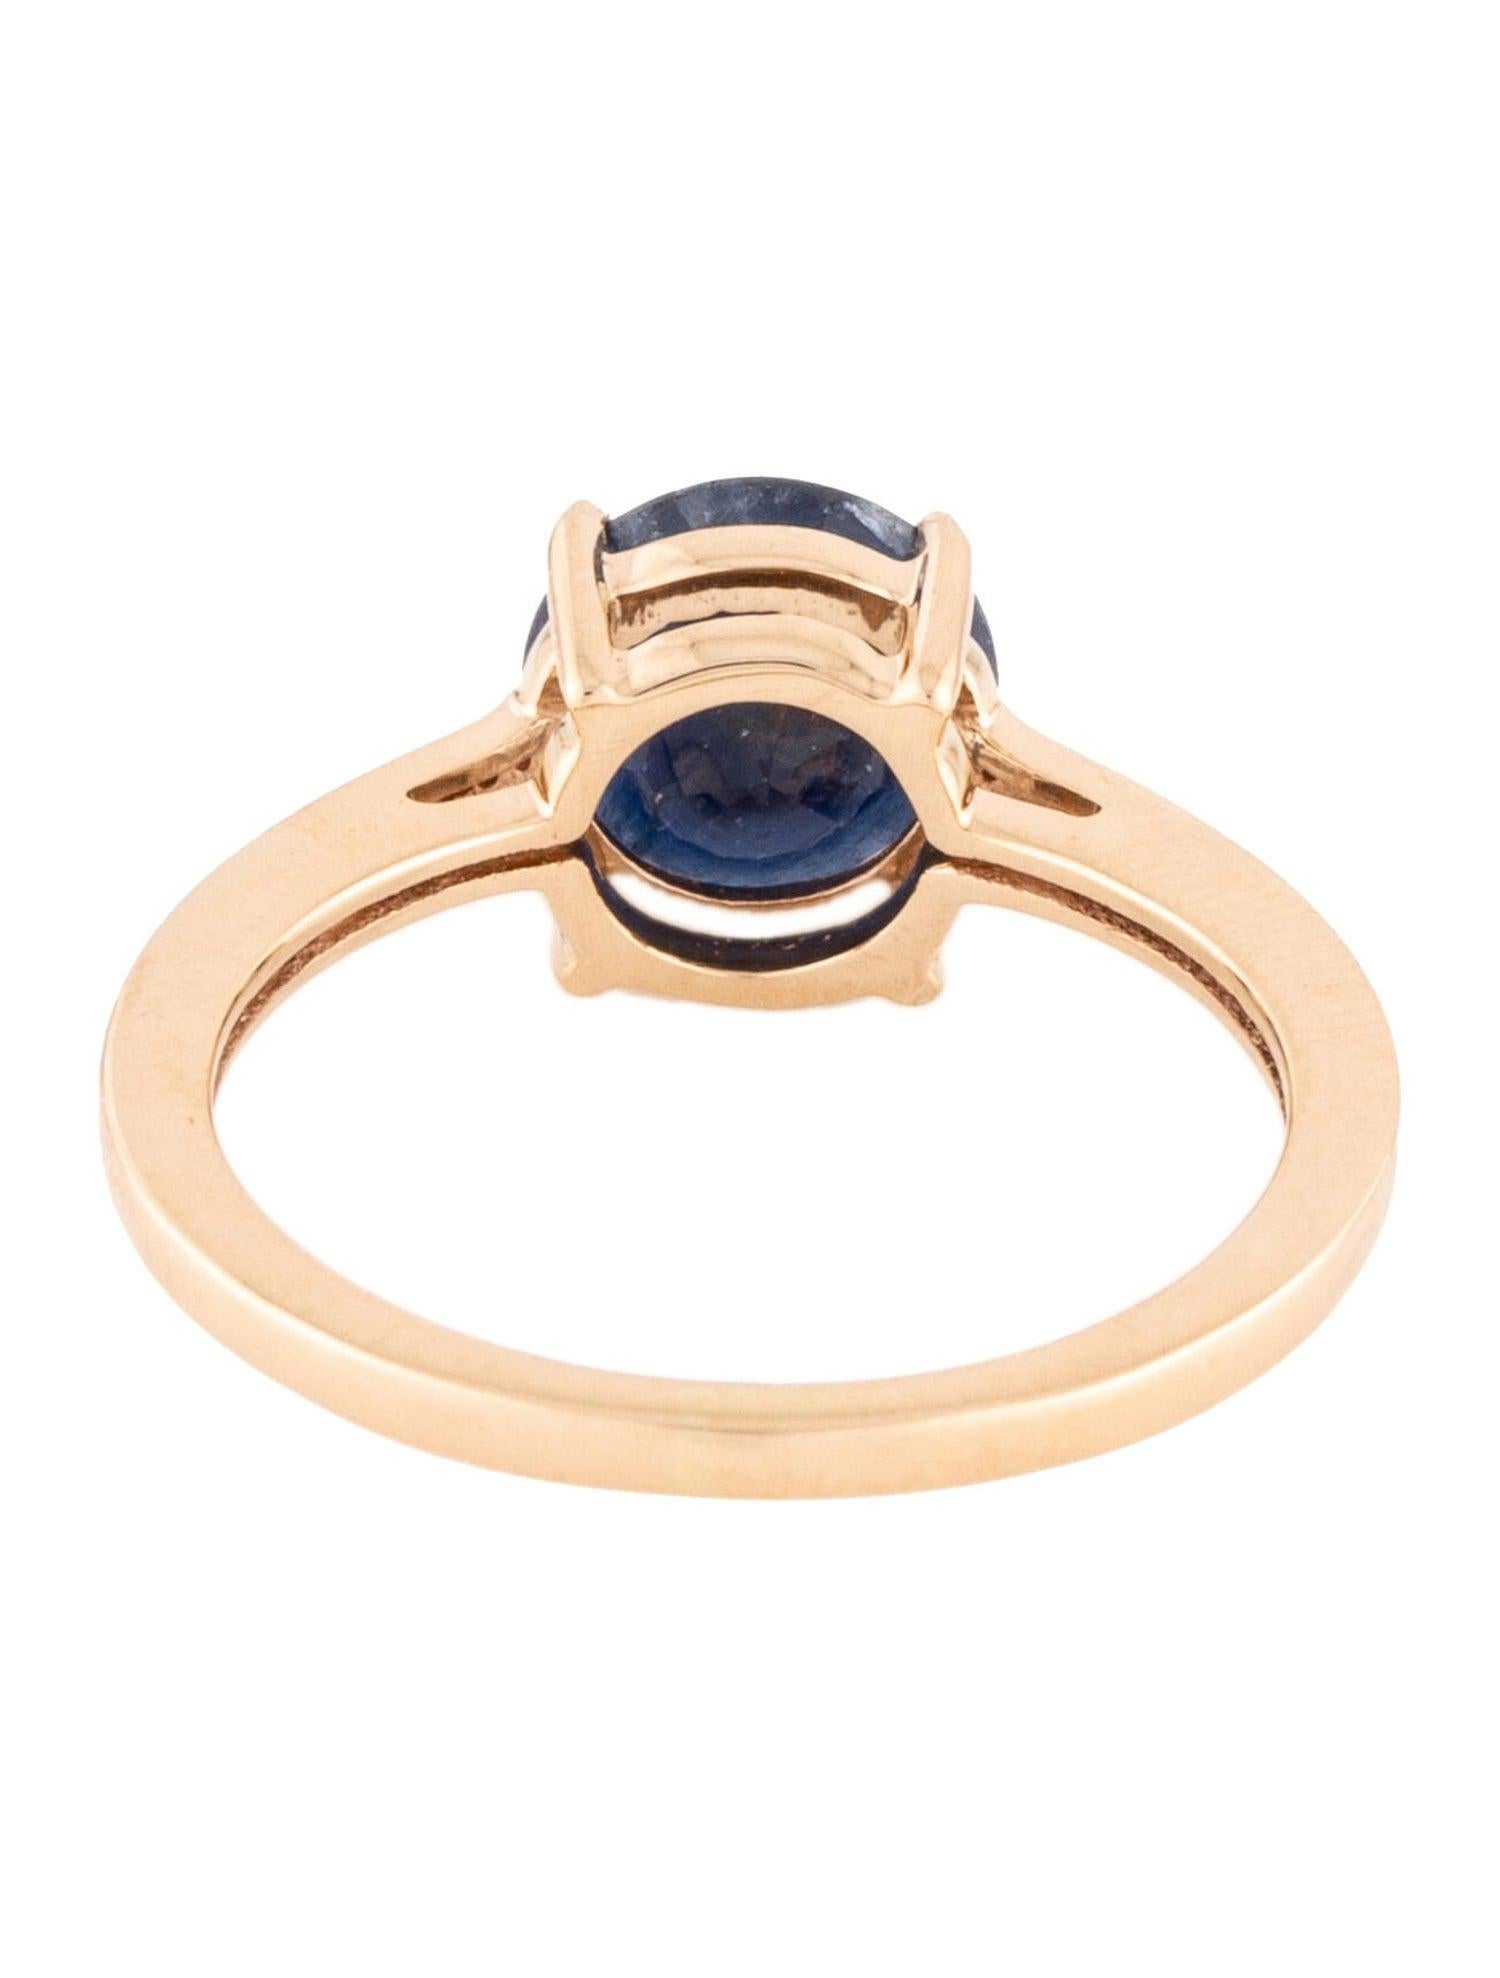 Brilliant Cut Luxury 14K Sapphire Cocktail Ring 1.92ct - Size 6.75 - Elegant Statement Jewelry For Sale